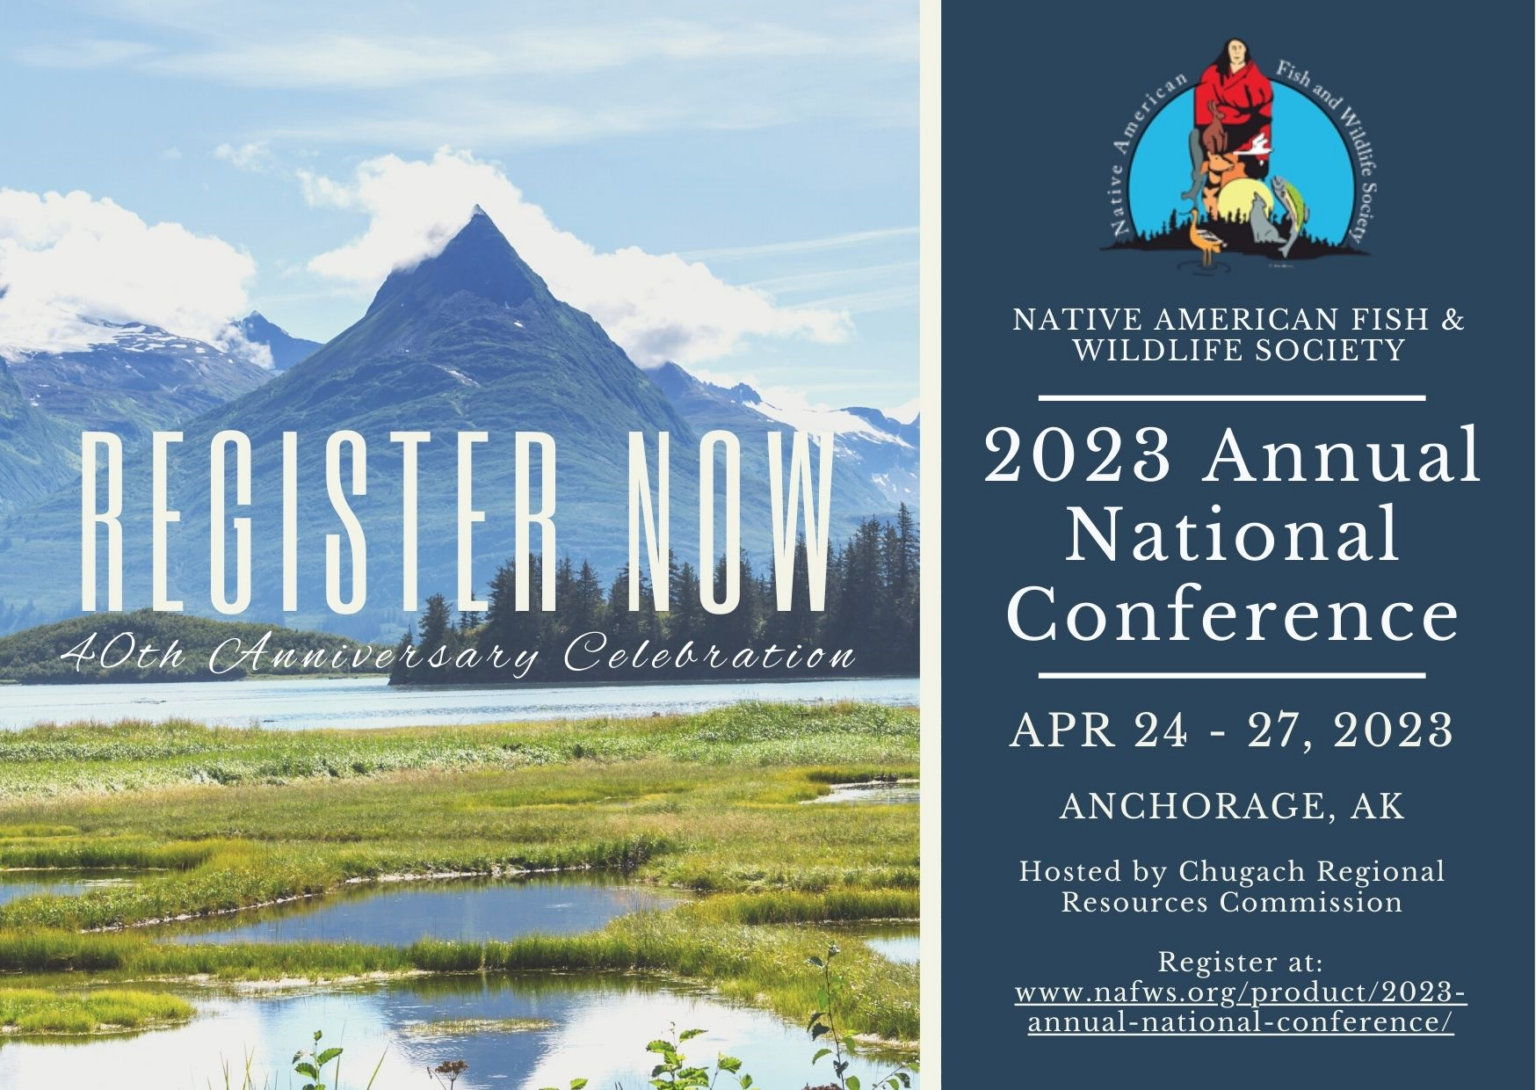 2023 Native American Fish & Wildlife Society National Annual Conference